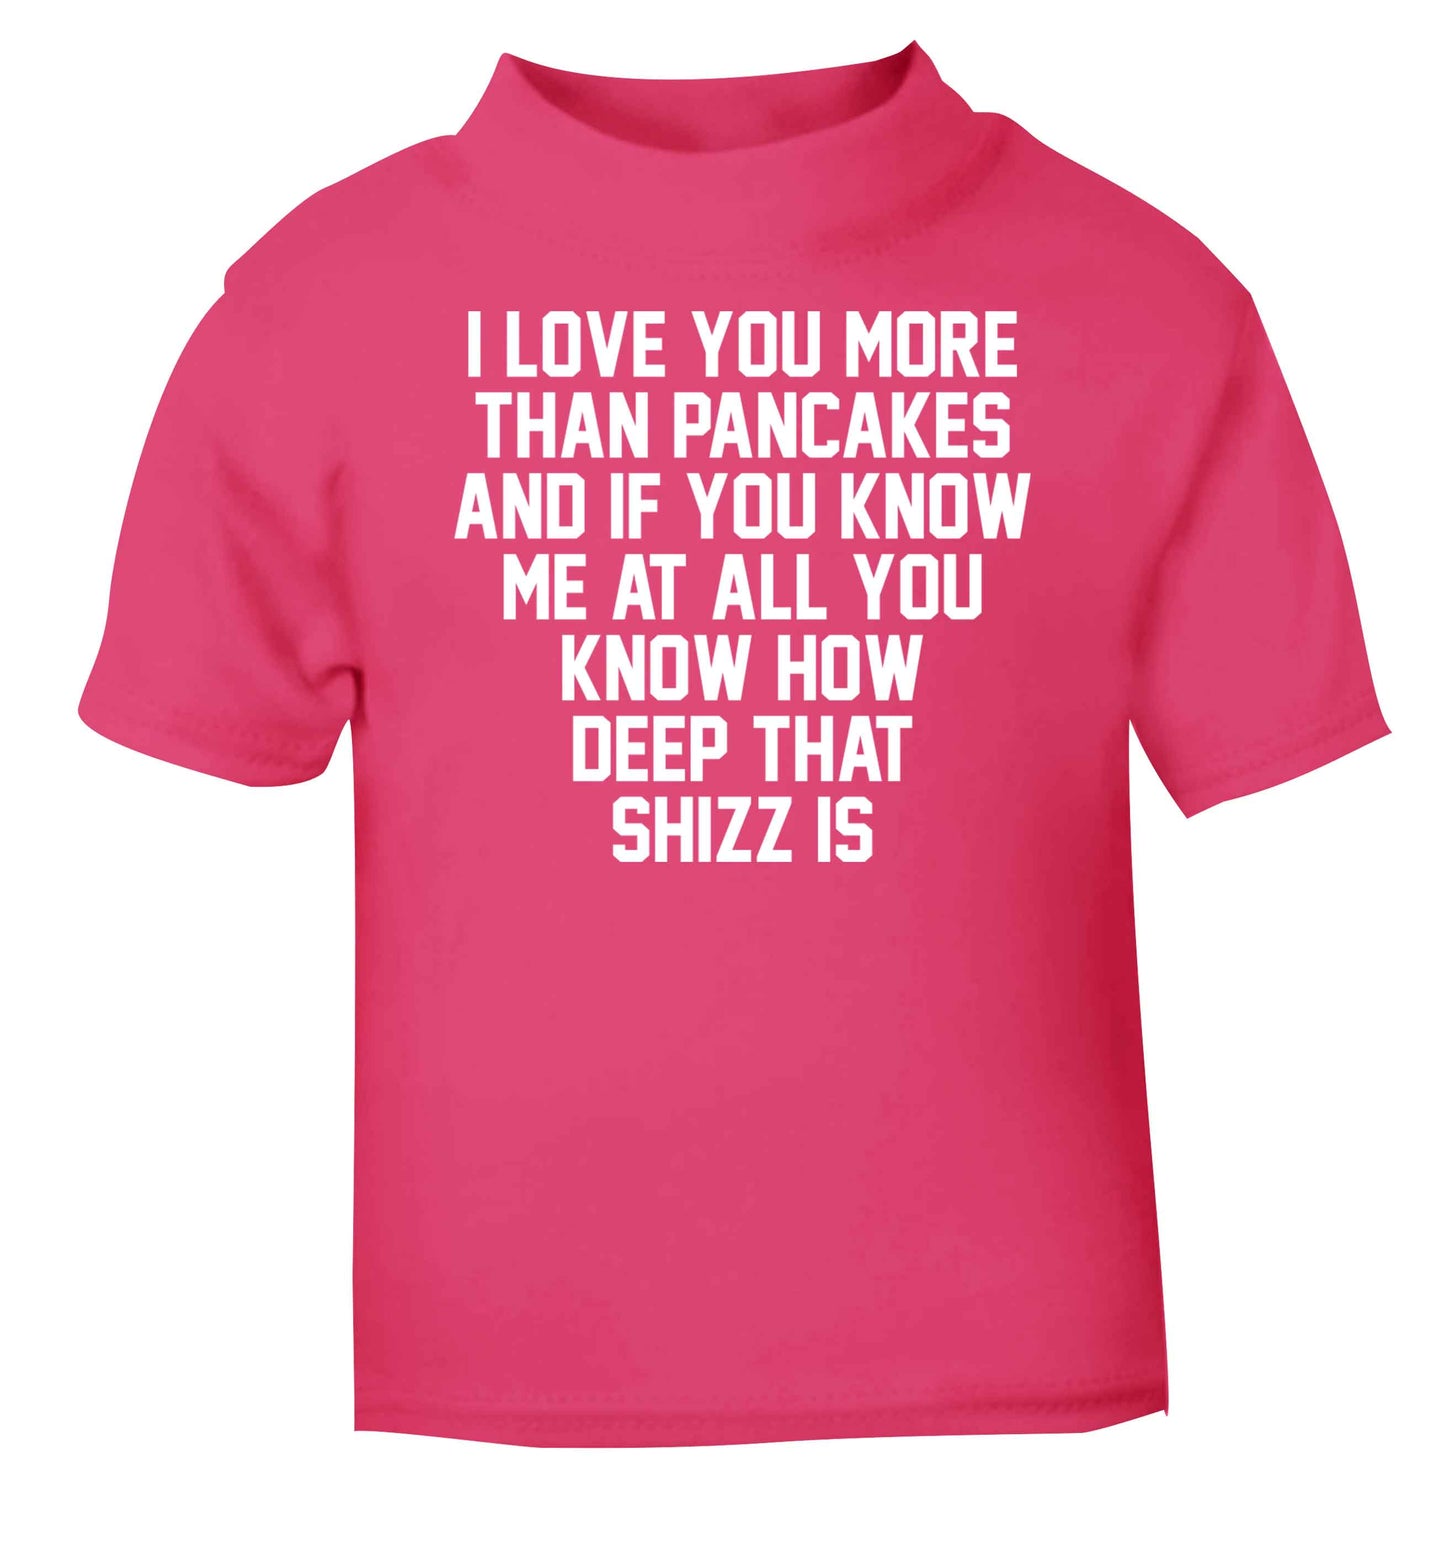 I love you more than pancakes and if you know me at all you know how deep that shizz is pink baby toddler Tshirt 2 Years